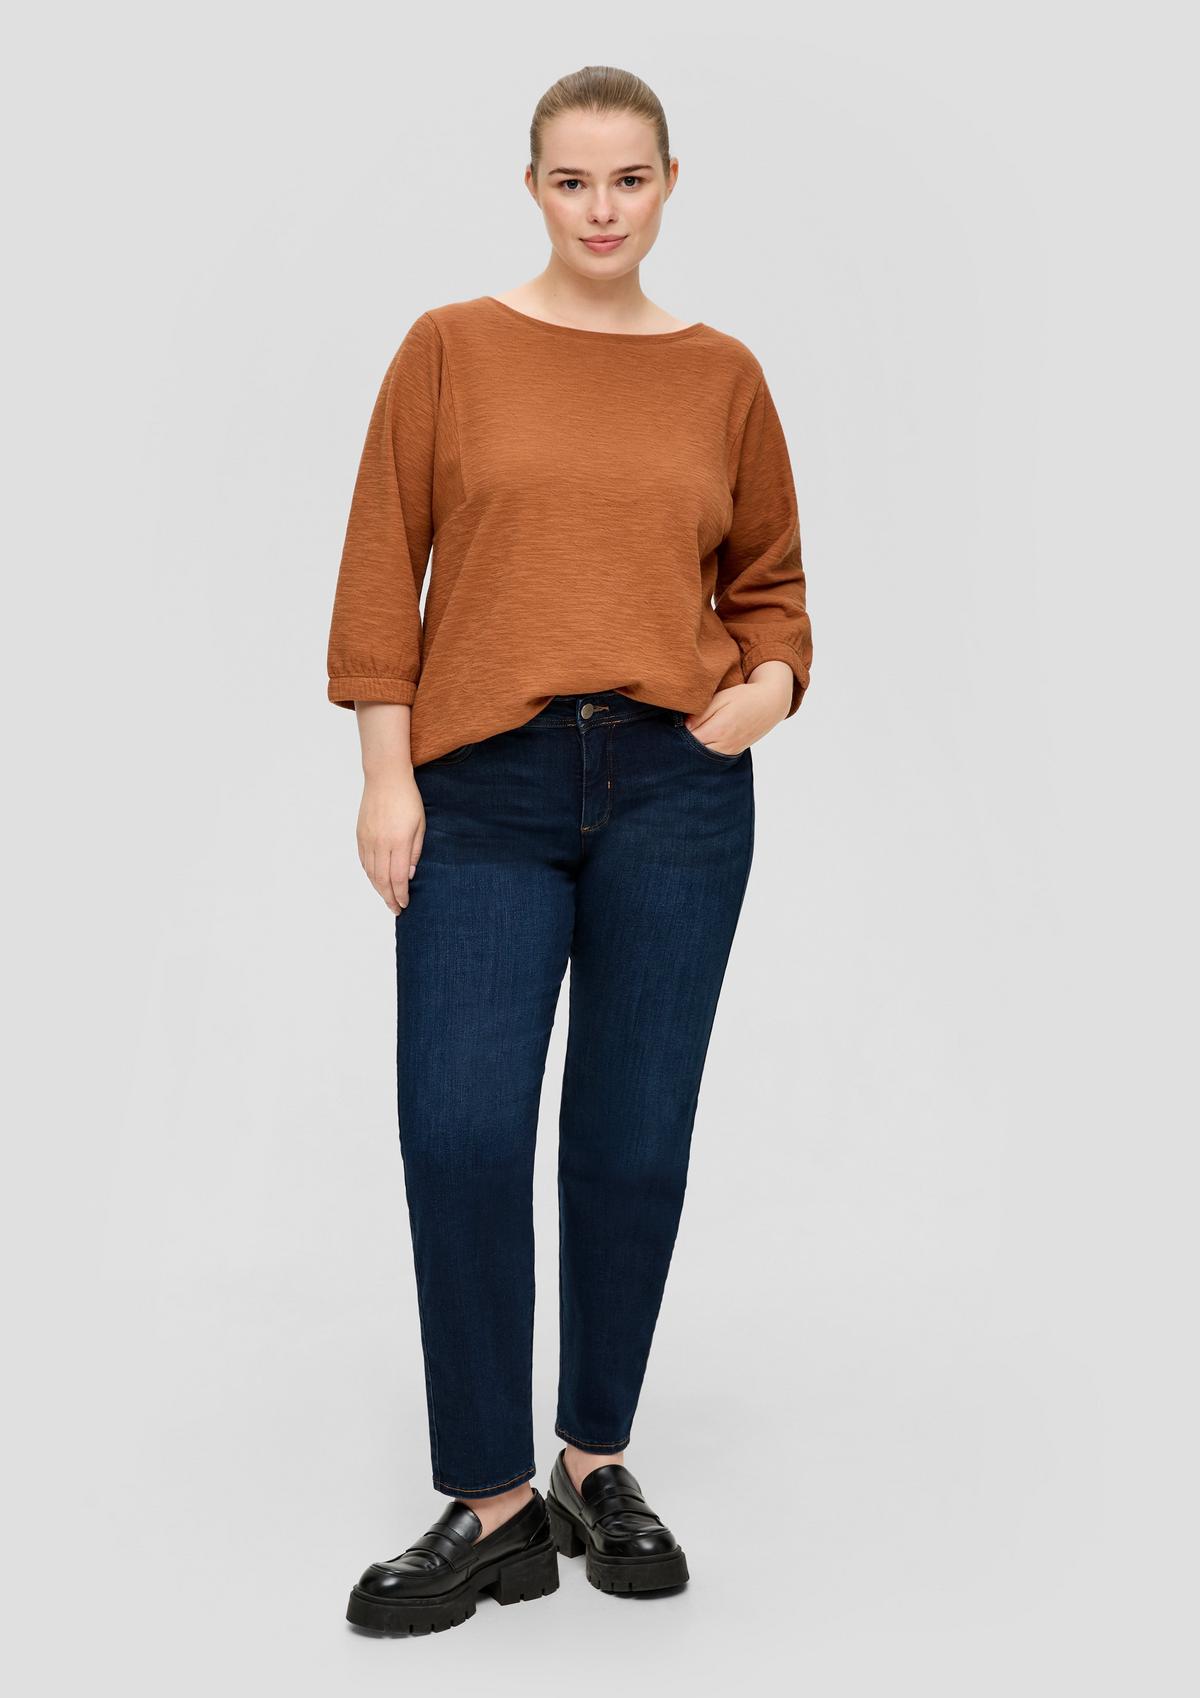 s.Oliver Jeans / Curvy Fit / Mid Rise / Straight Leg